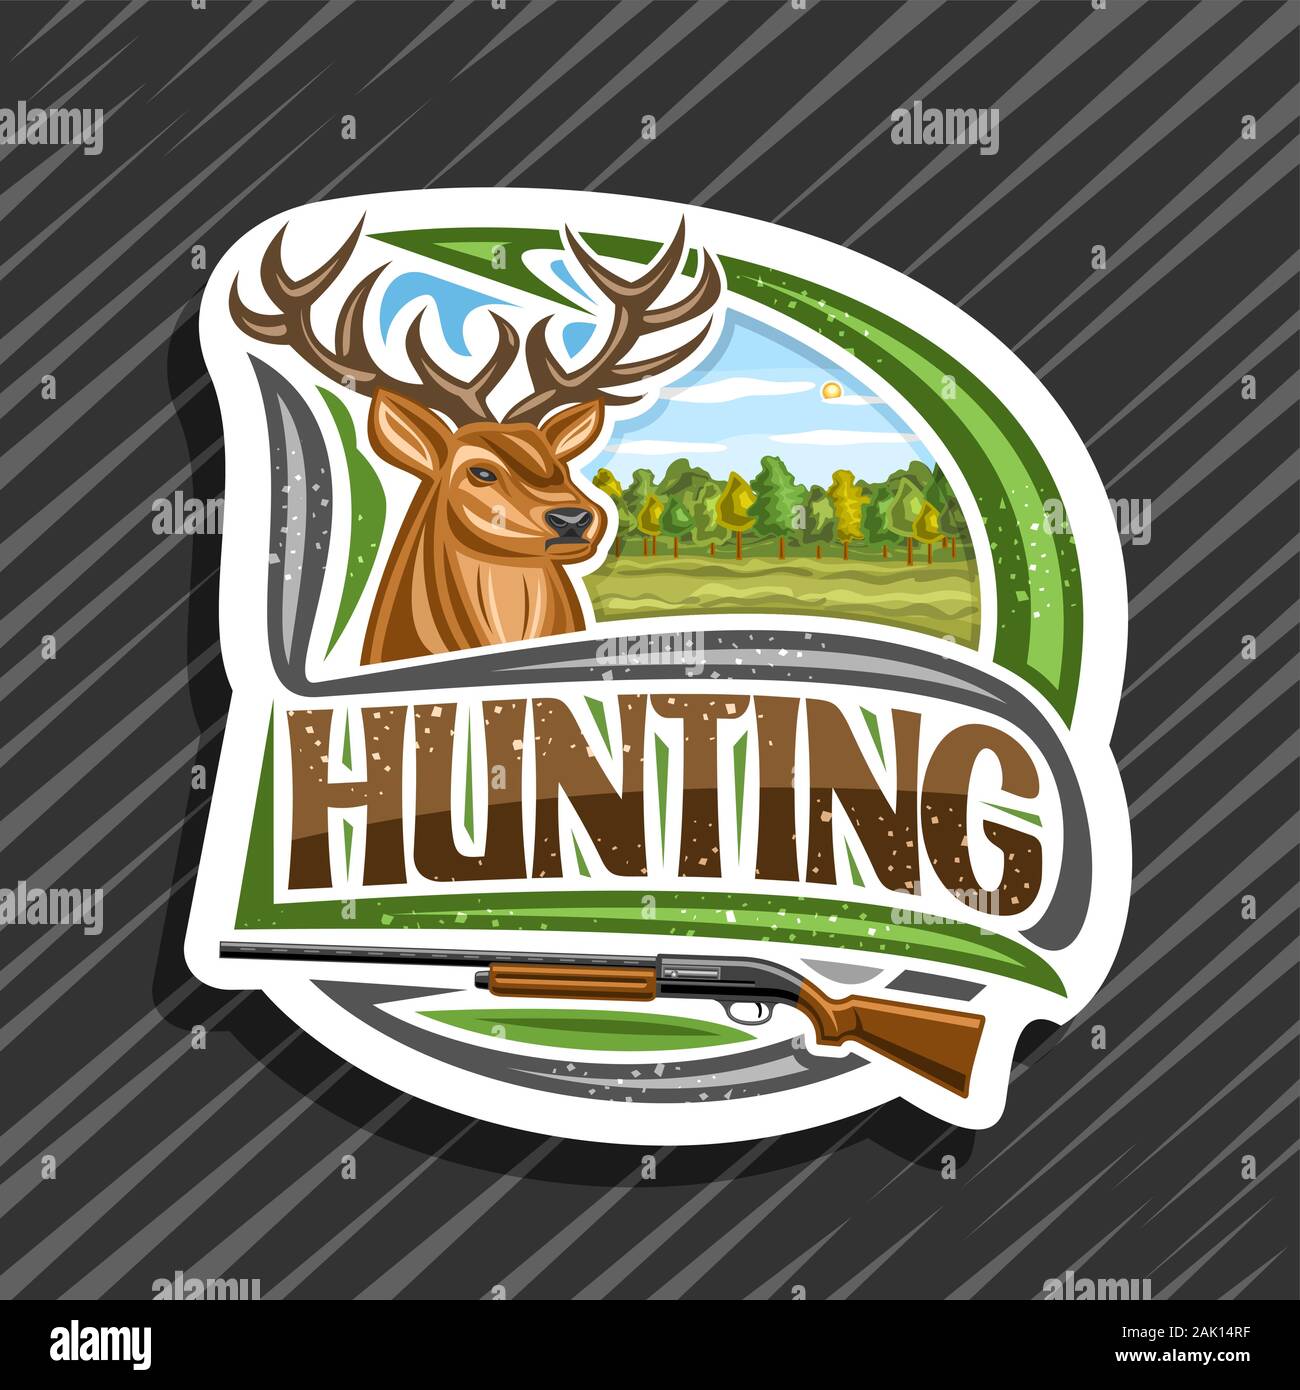 Vector logo for Hunting, decorative cut paper label with illustration of white-tailed deer head on trees background, original typeface for word huntin Stock Vector